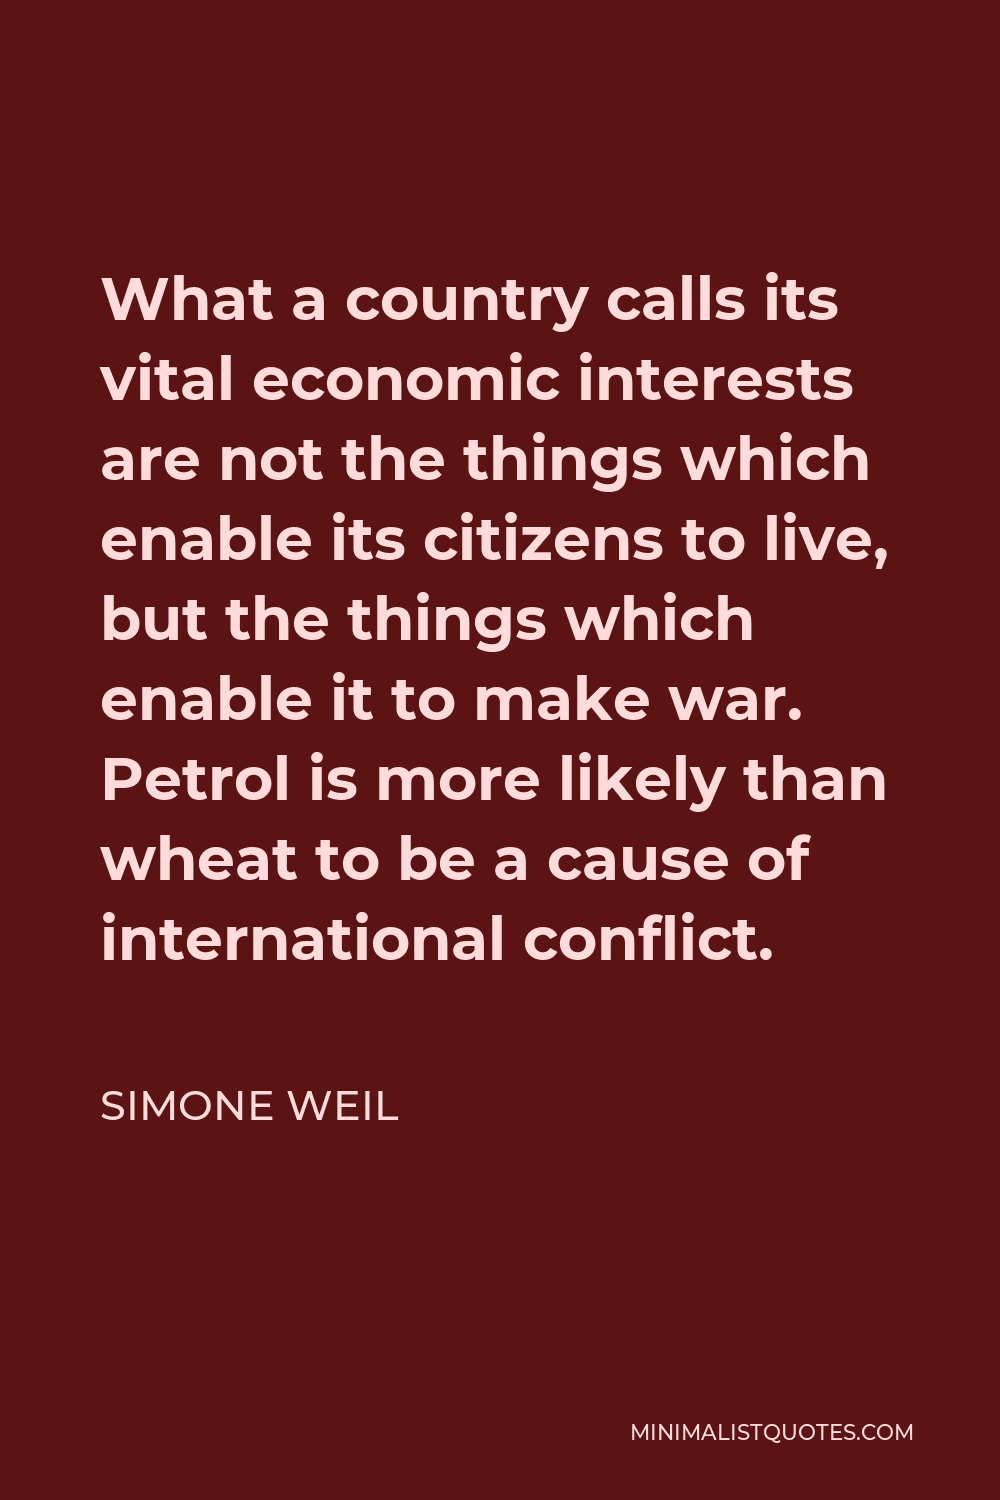 Simone Weil Quote - What a country calls its vital economic interests are not the things which enable its citizens to live, but the things which enable it to make war. Petrol is more likely than wheat to be a cause of international conflict.